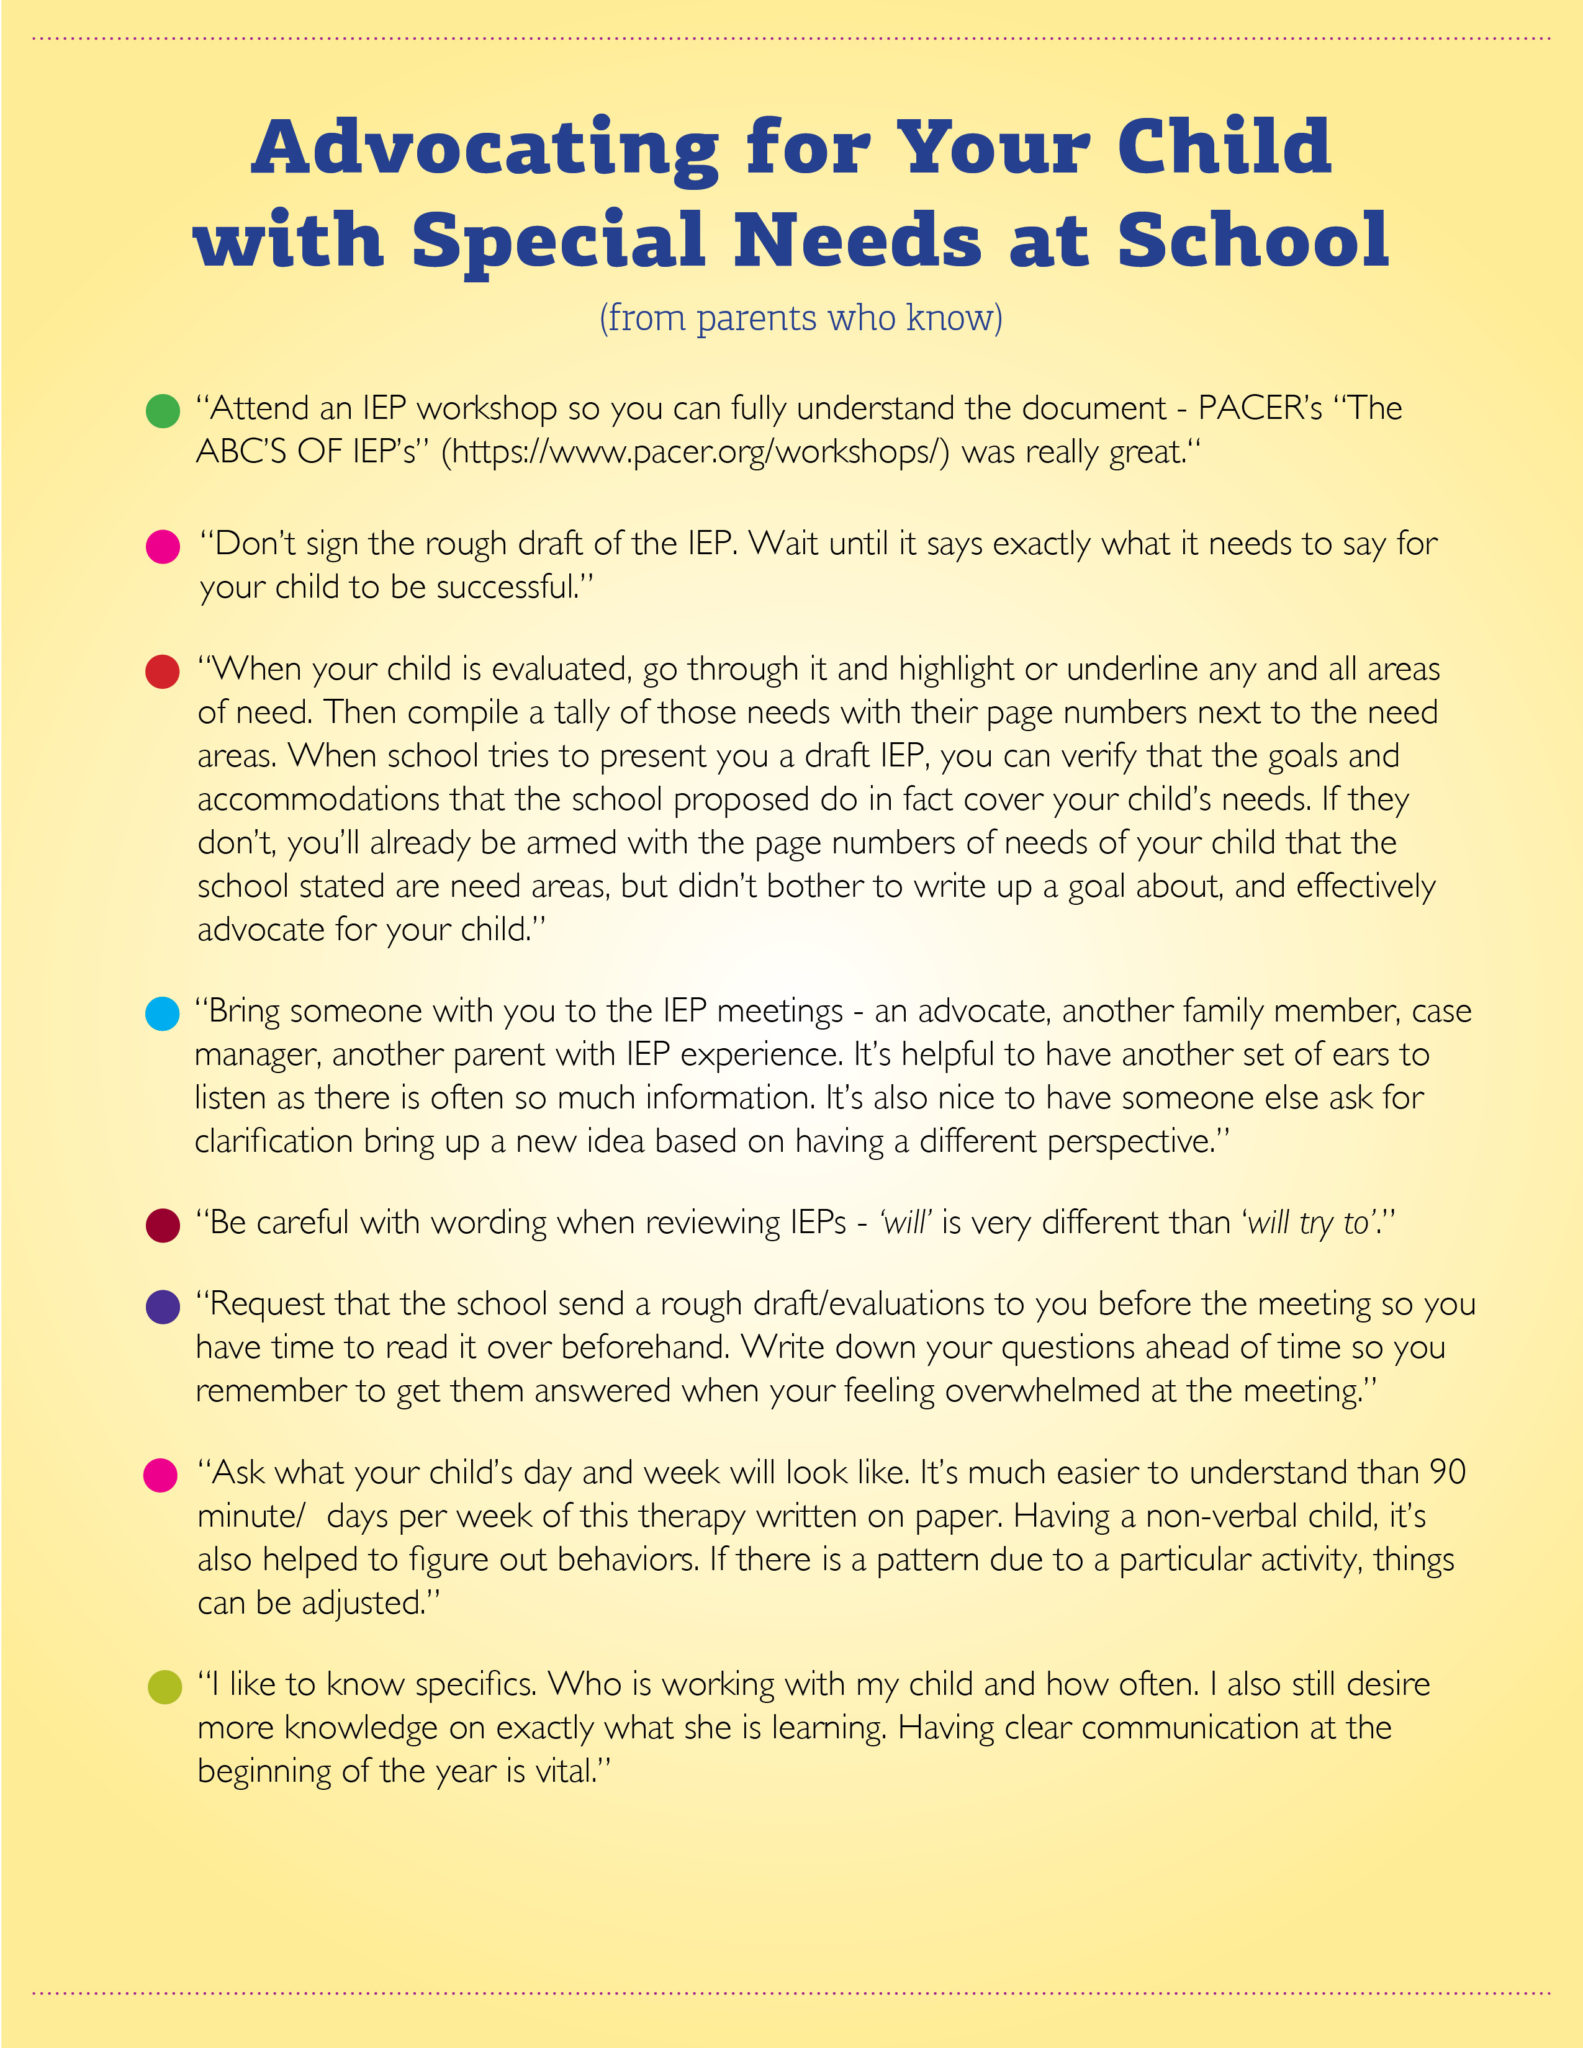 advocacy for your child in school. tips from parents helping parents